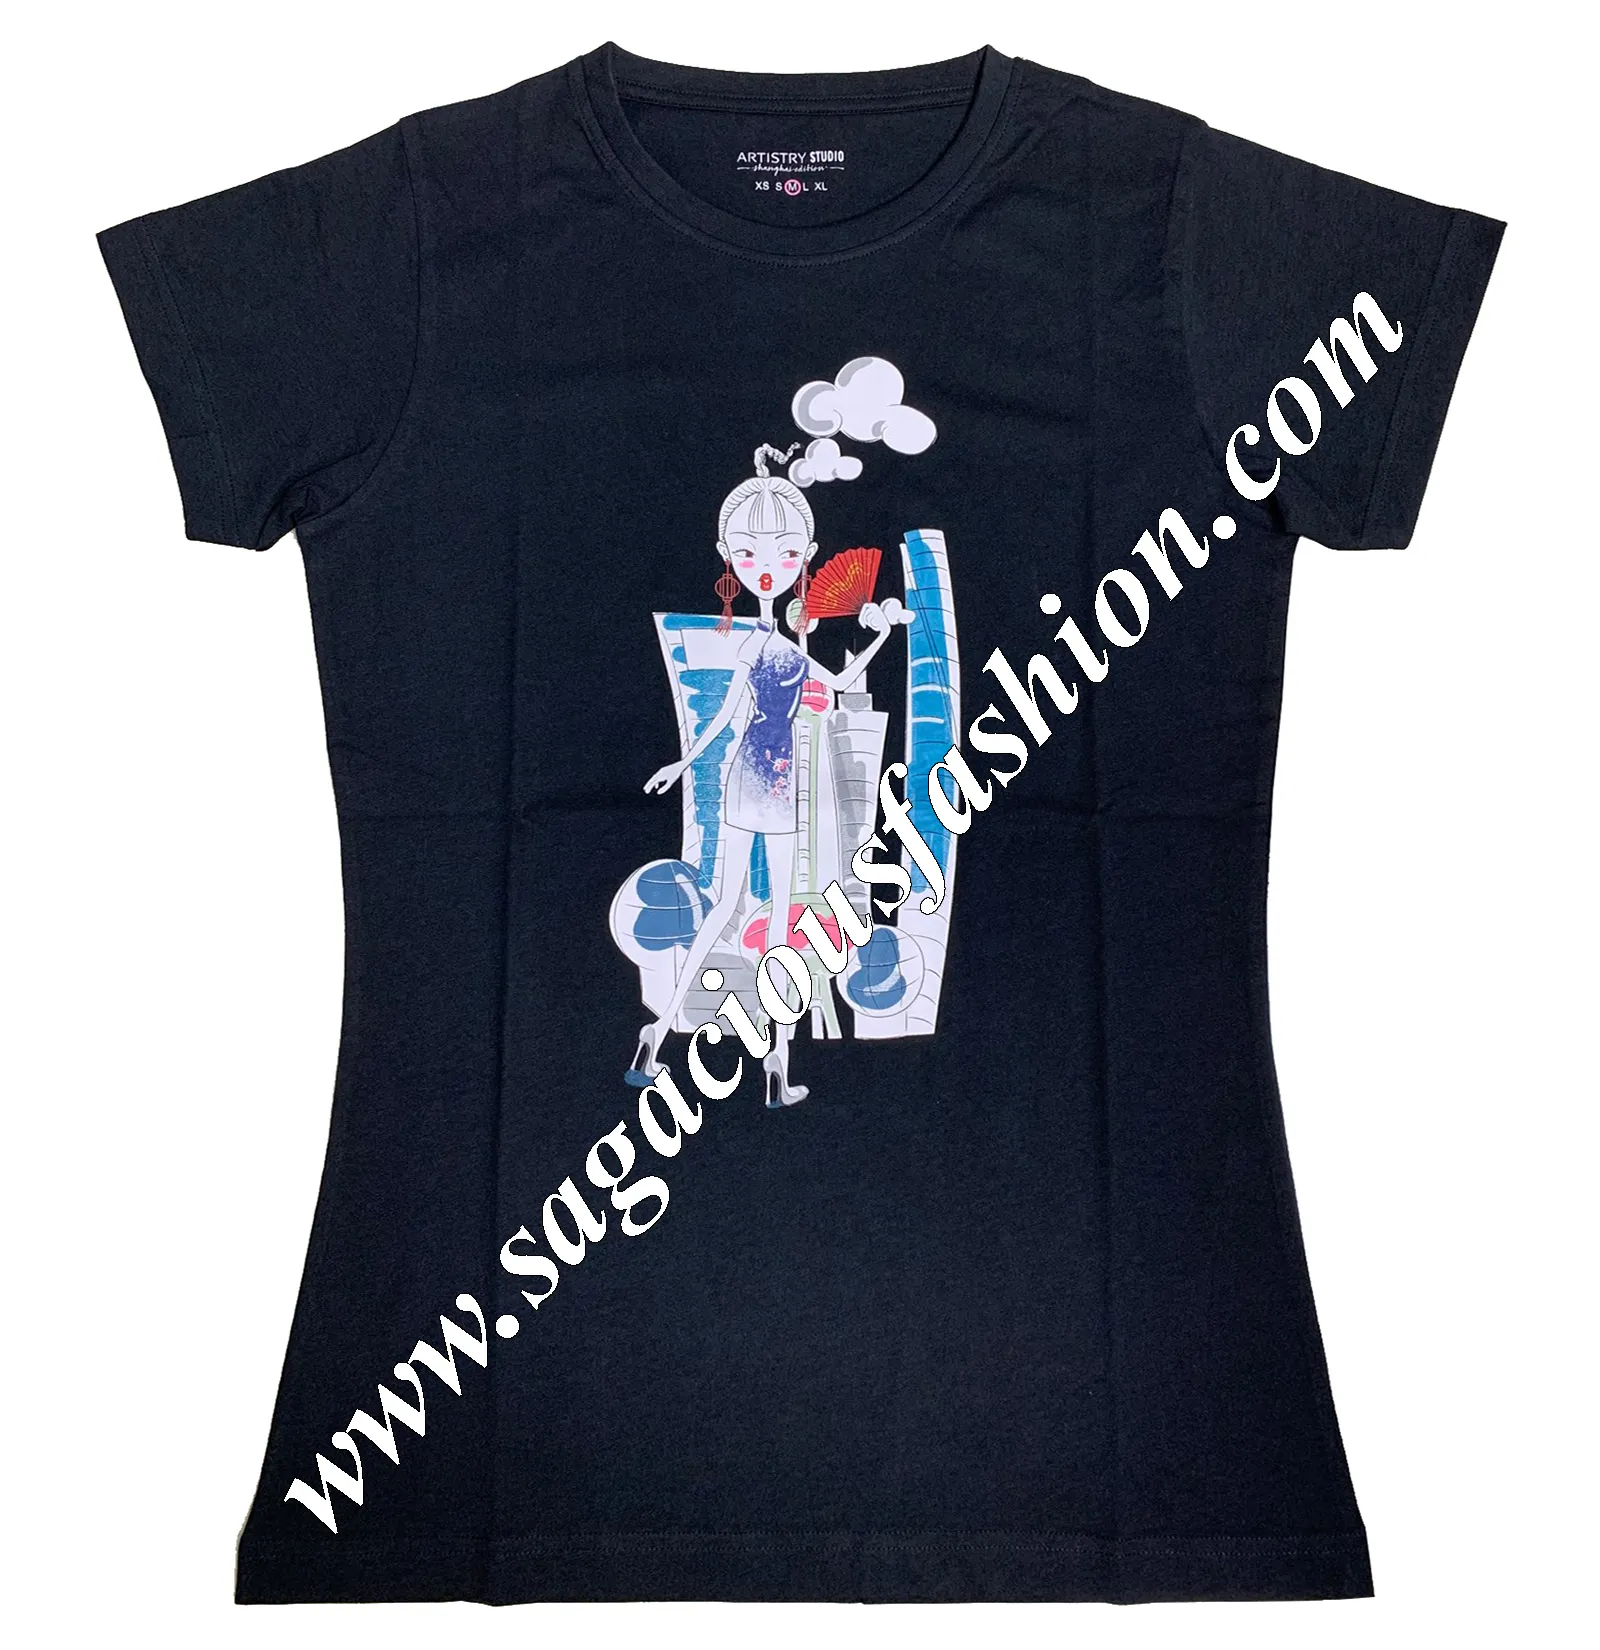 Hight Quality Export Oriented Ladies T shirt Printed 100% cotton 180 GSM O neck t shirts Direct Factory Manufacture Bangladesh